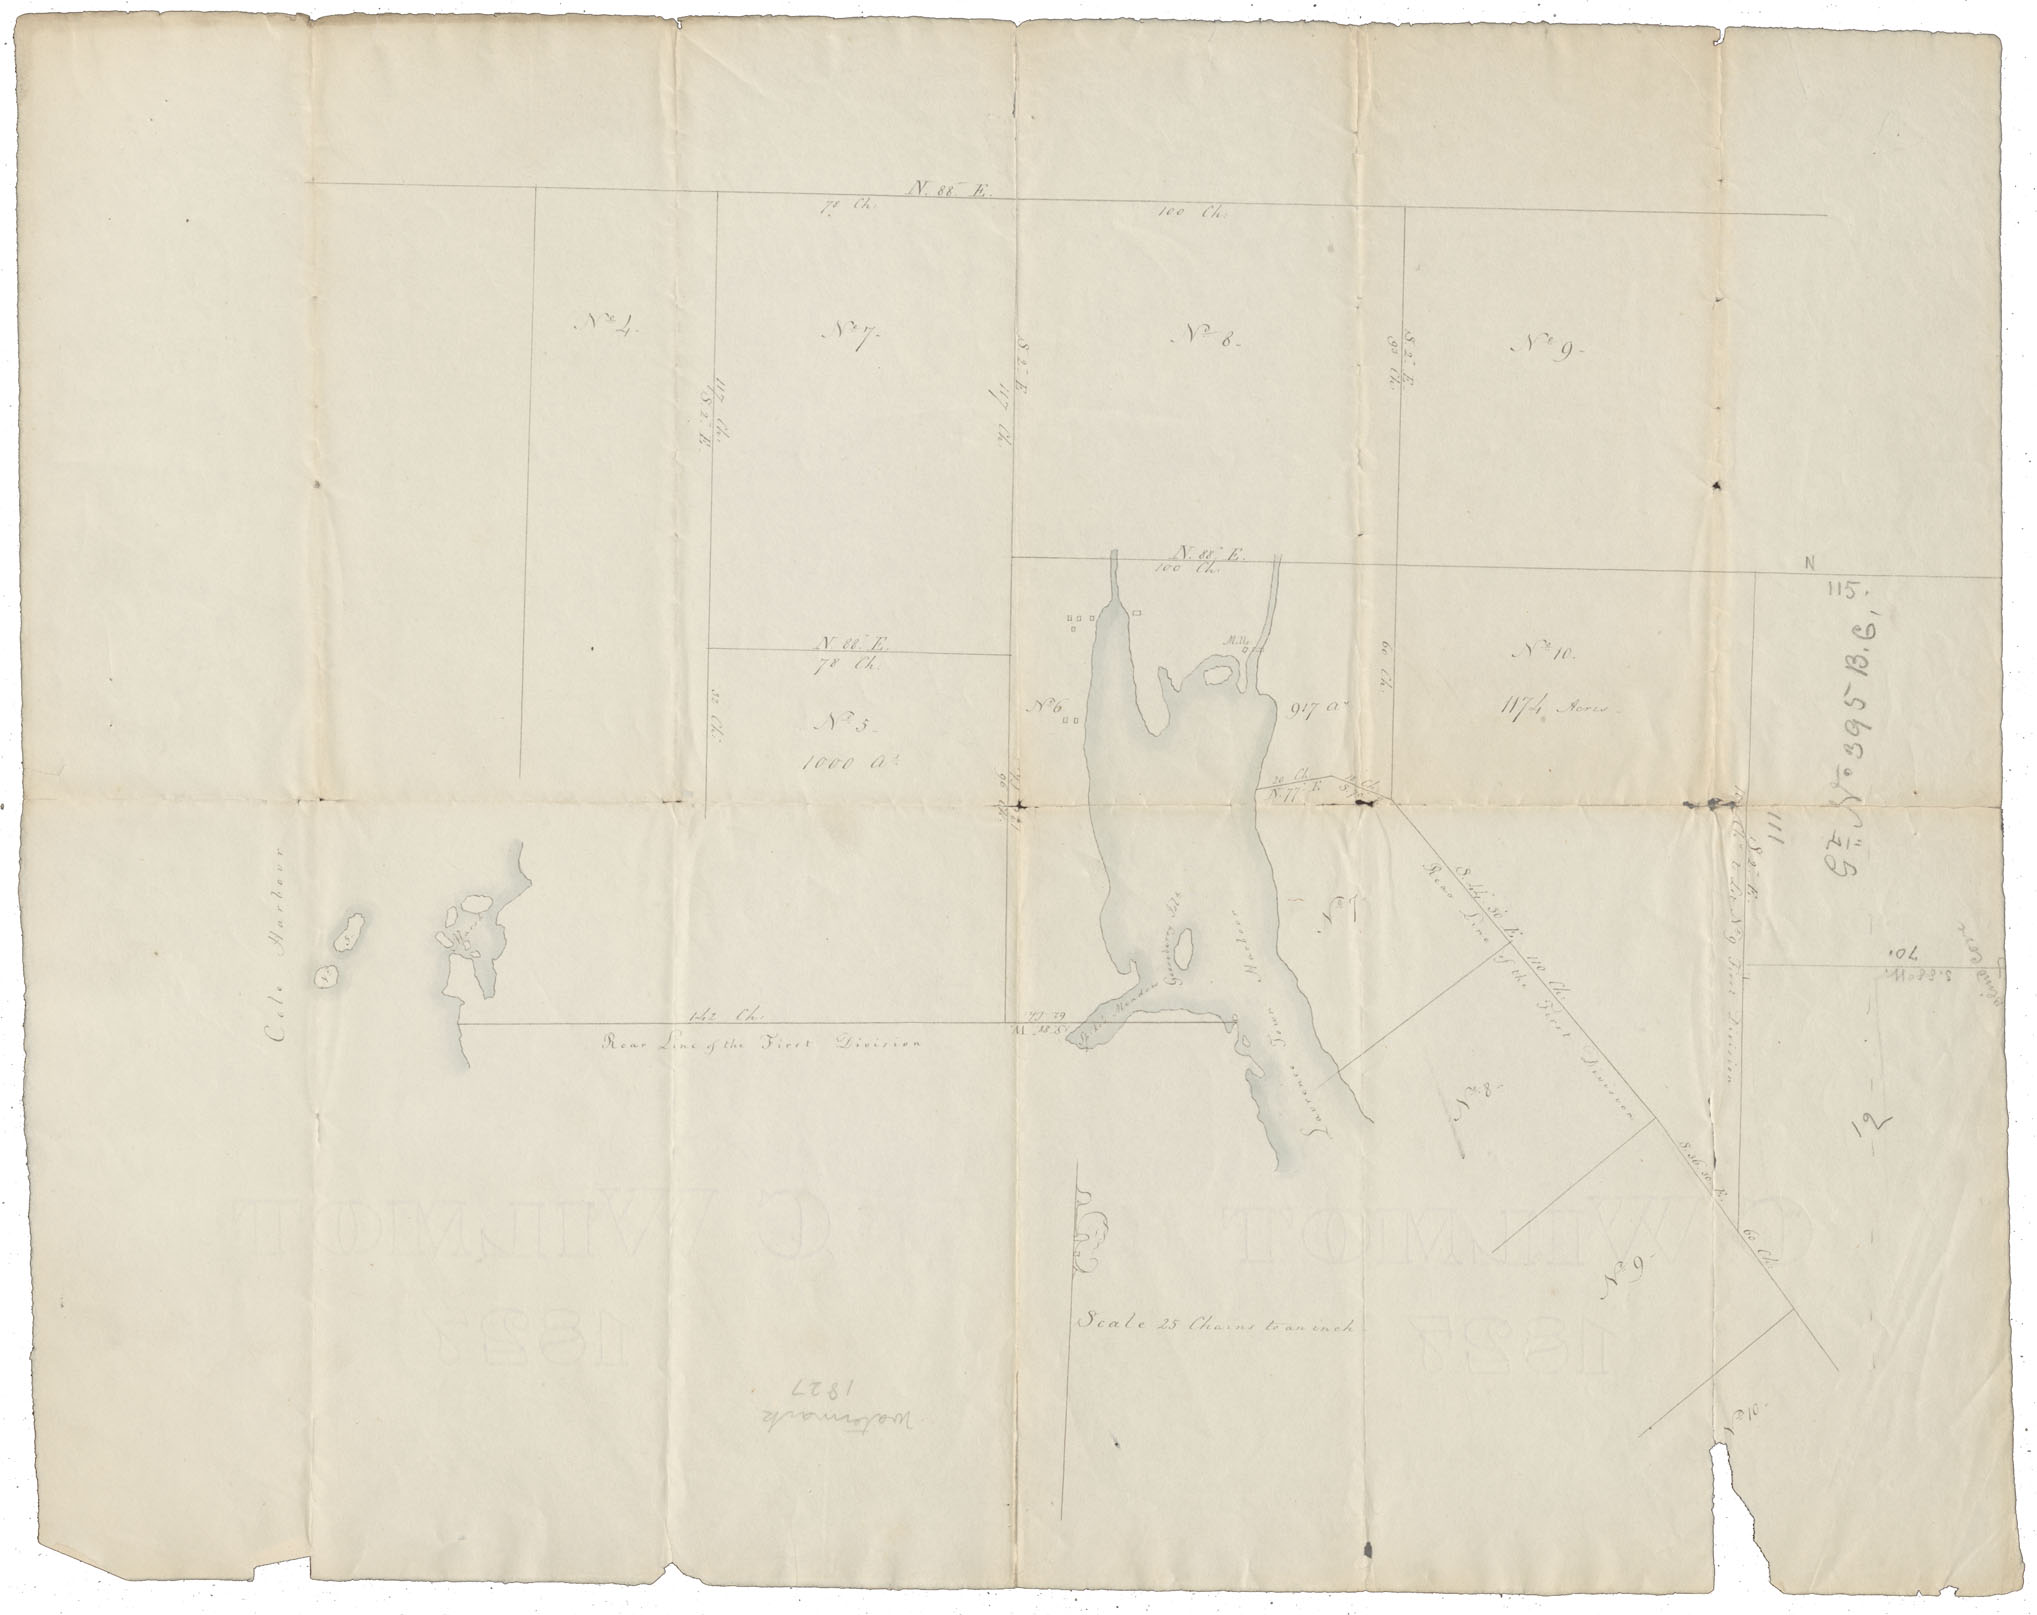 Halifax County Cole harbour and Lawrencetown Harbour, w.m.1827